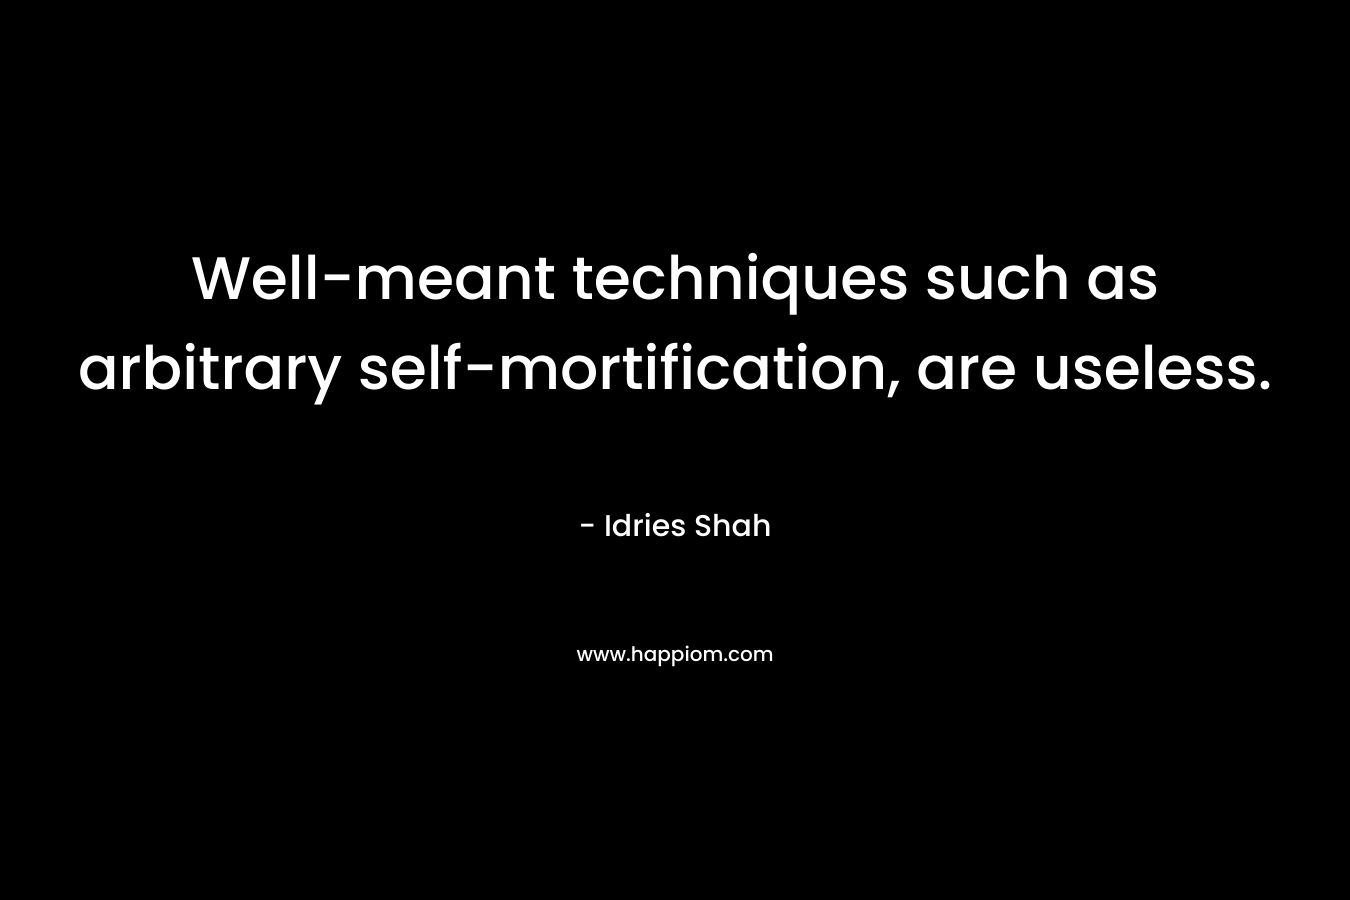 Well-meant techniques such as arbitrary self-mortification, are useless. – Idries Shah